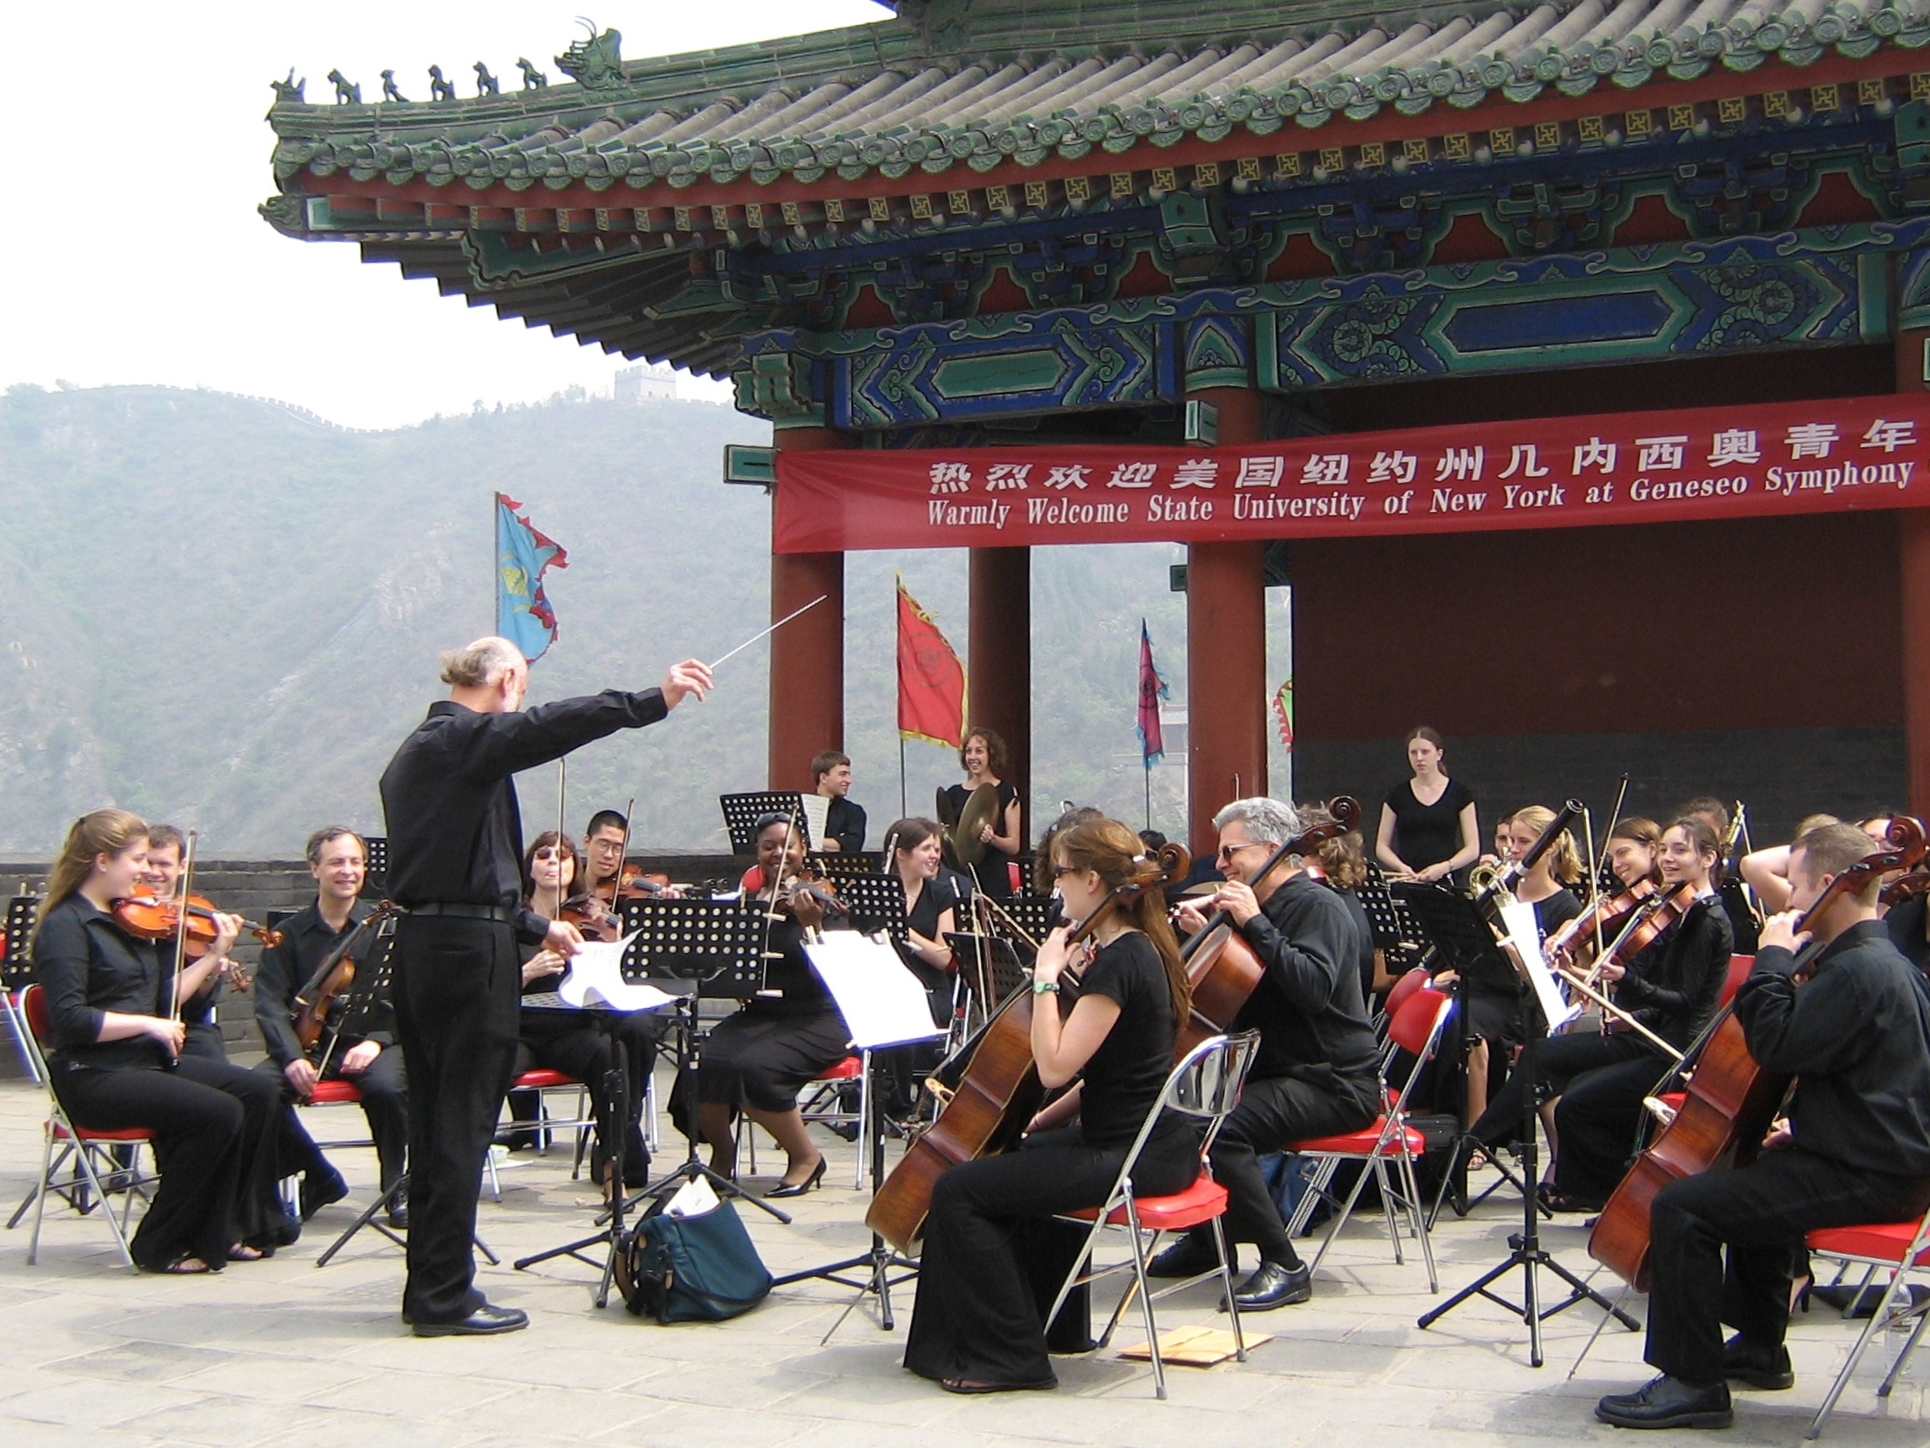 Orchestra on the Great Wall of China